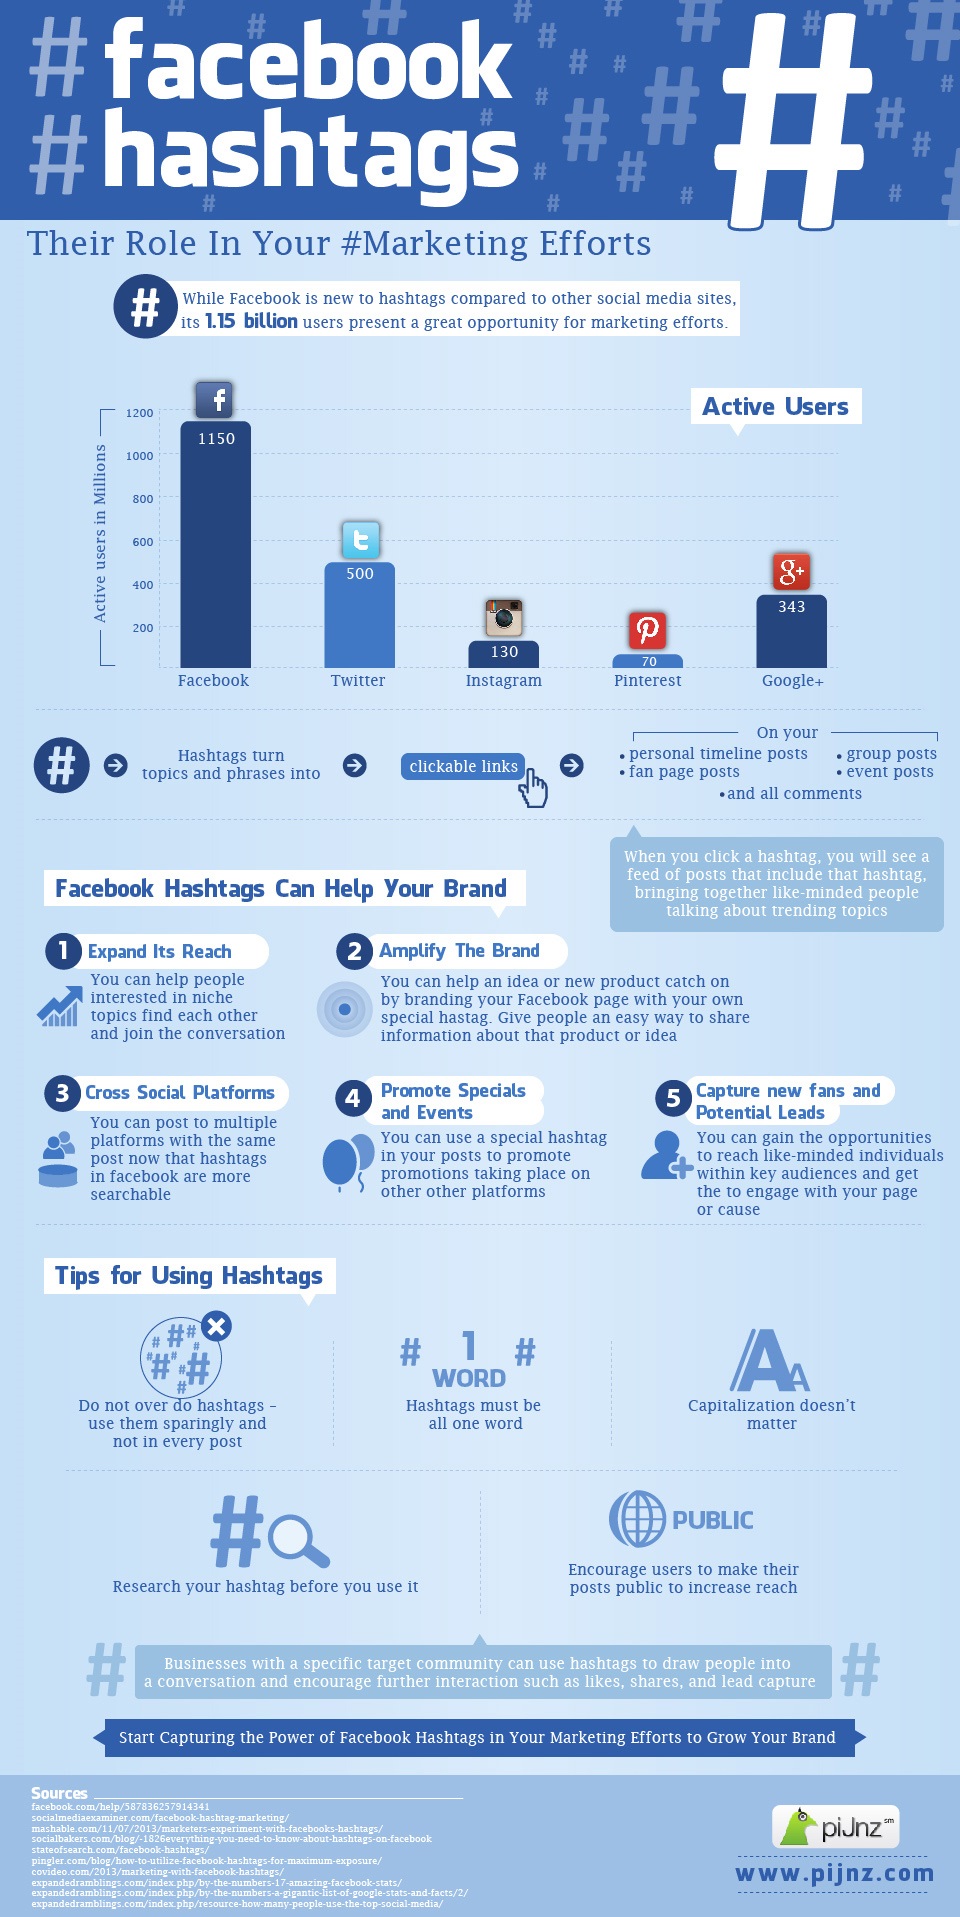 hashtags-infographic